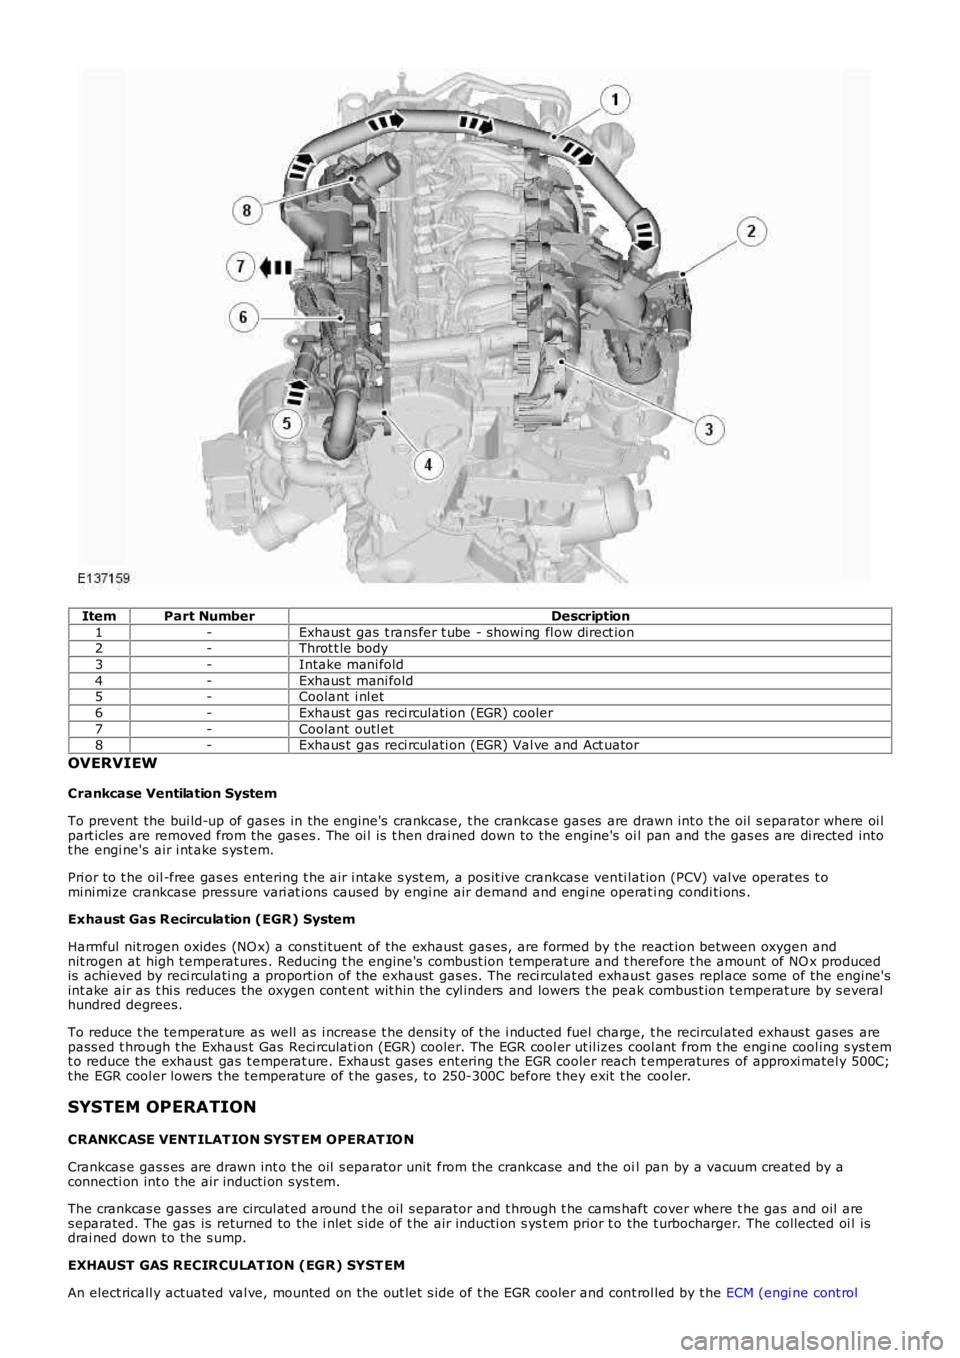 LAND ROVER FRELANDER 2 2006  Repair Manual ItemPart NumberDescription
1-Exhaus t  gas  t rans fer t ube - showi ng fl ow direct ion2-Throt t le body
3-Intake mani fold
4-Exhaus t  mani fold5-Coolant  i nl et
6-Exhaus t  gas  reci rculati on (E